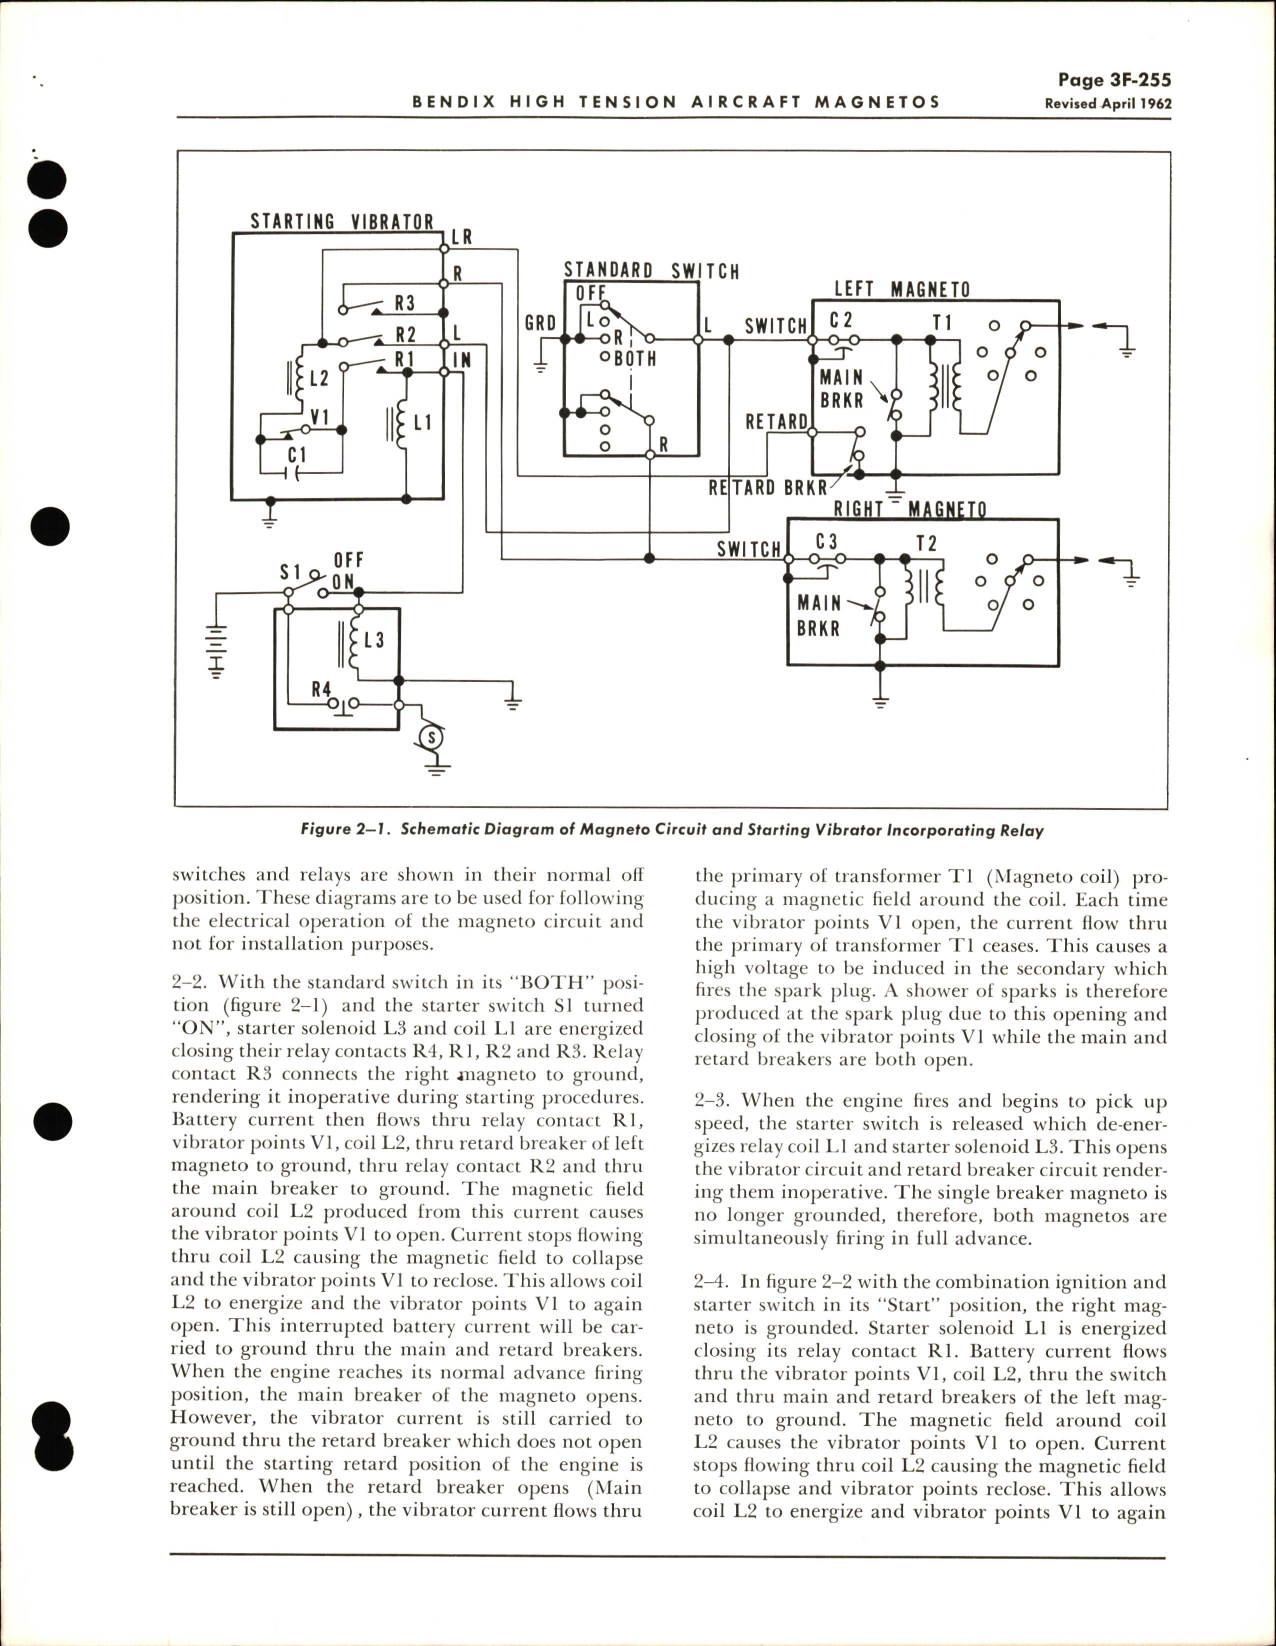 Sample page 5 from AirCorps Library document: Installation, Maintenance, and Operation Instructions for S-200 Series High Tension Aircraft Magnetos and Associated Components